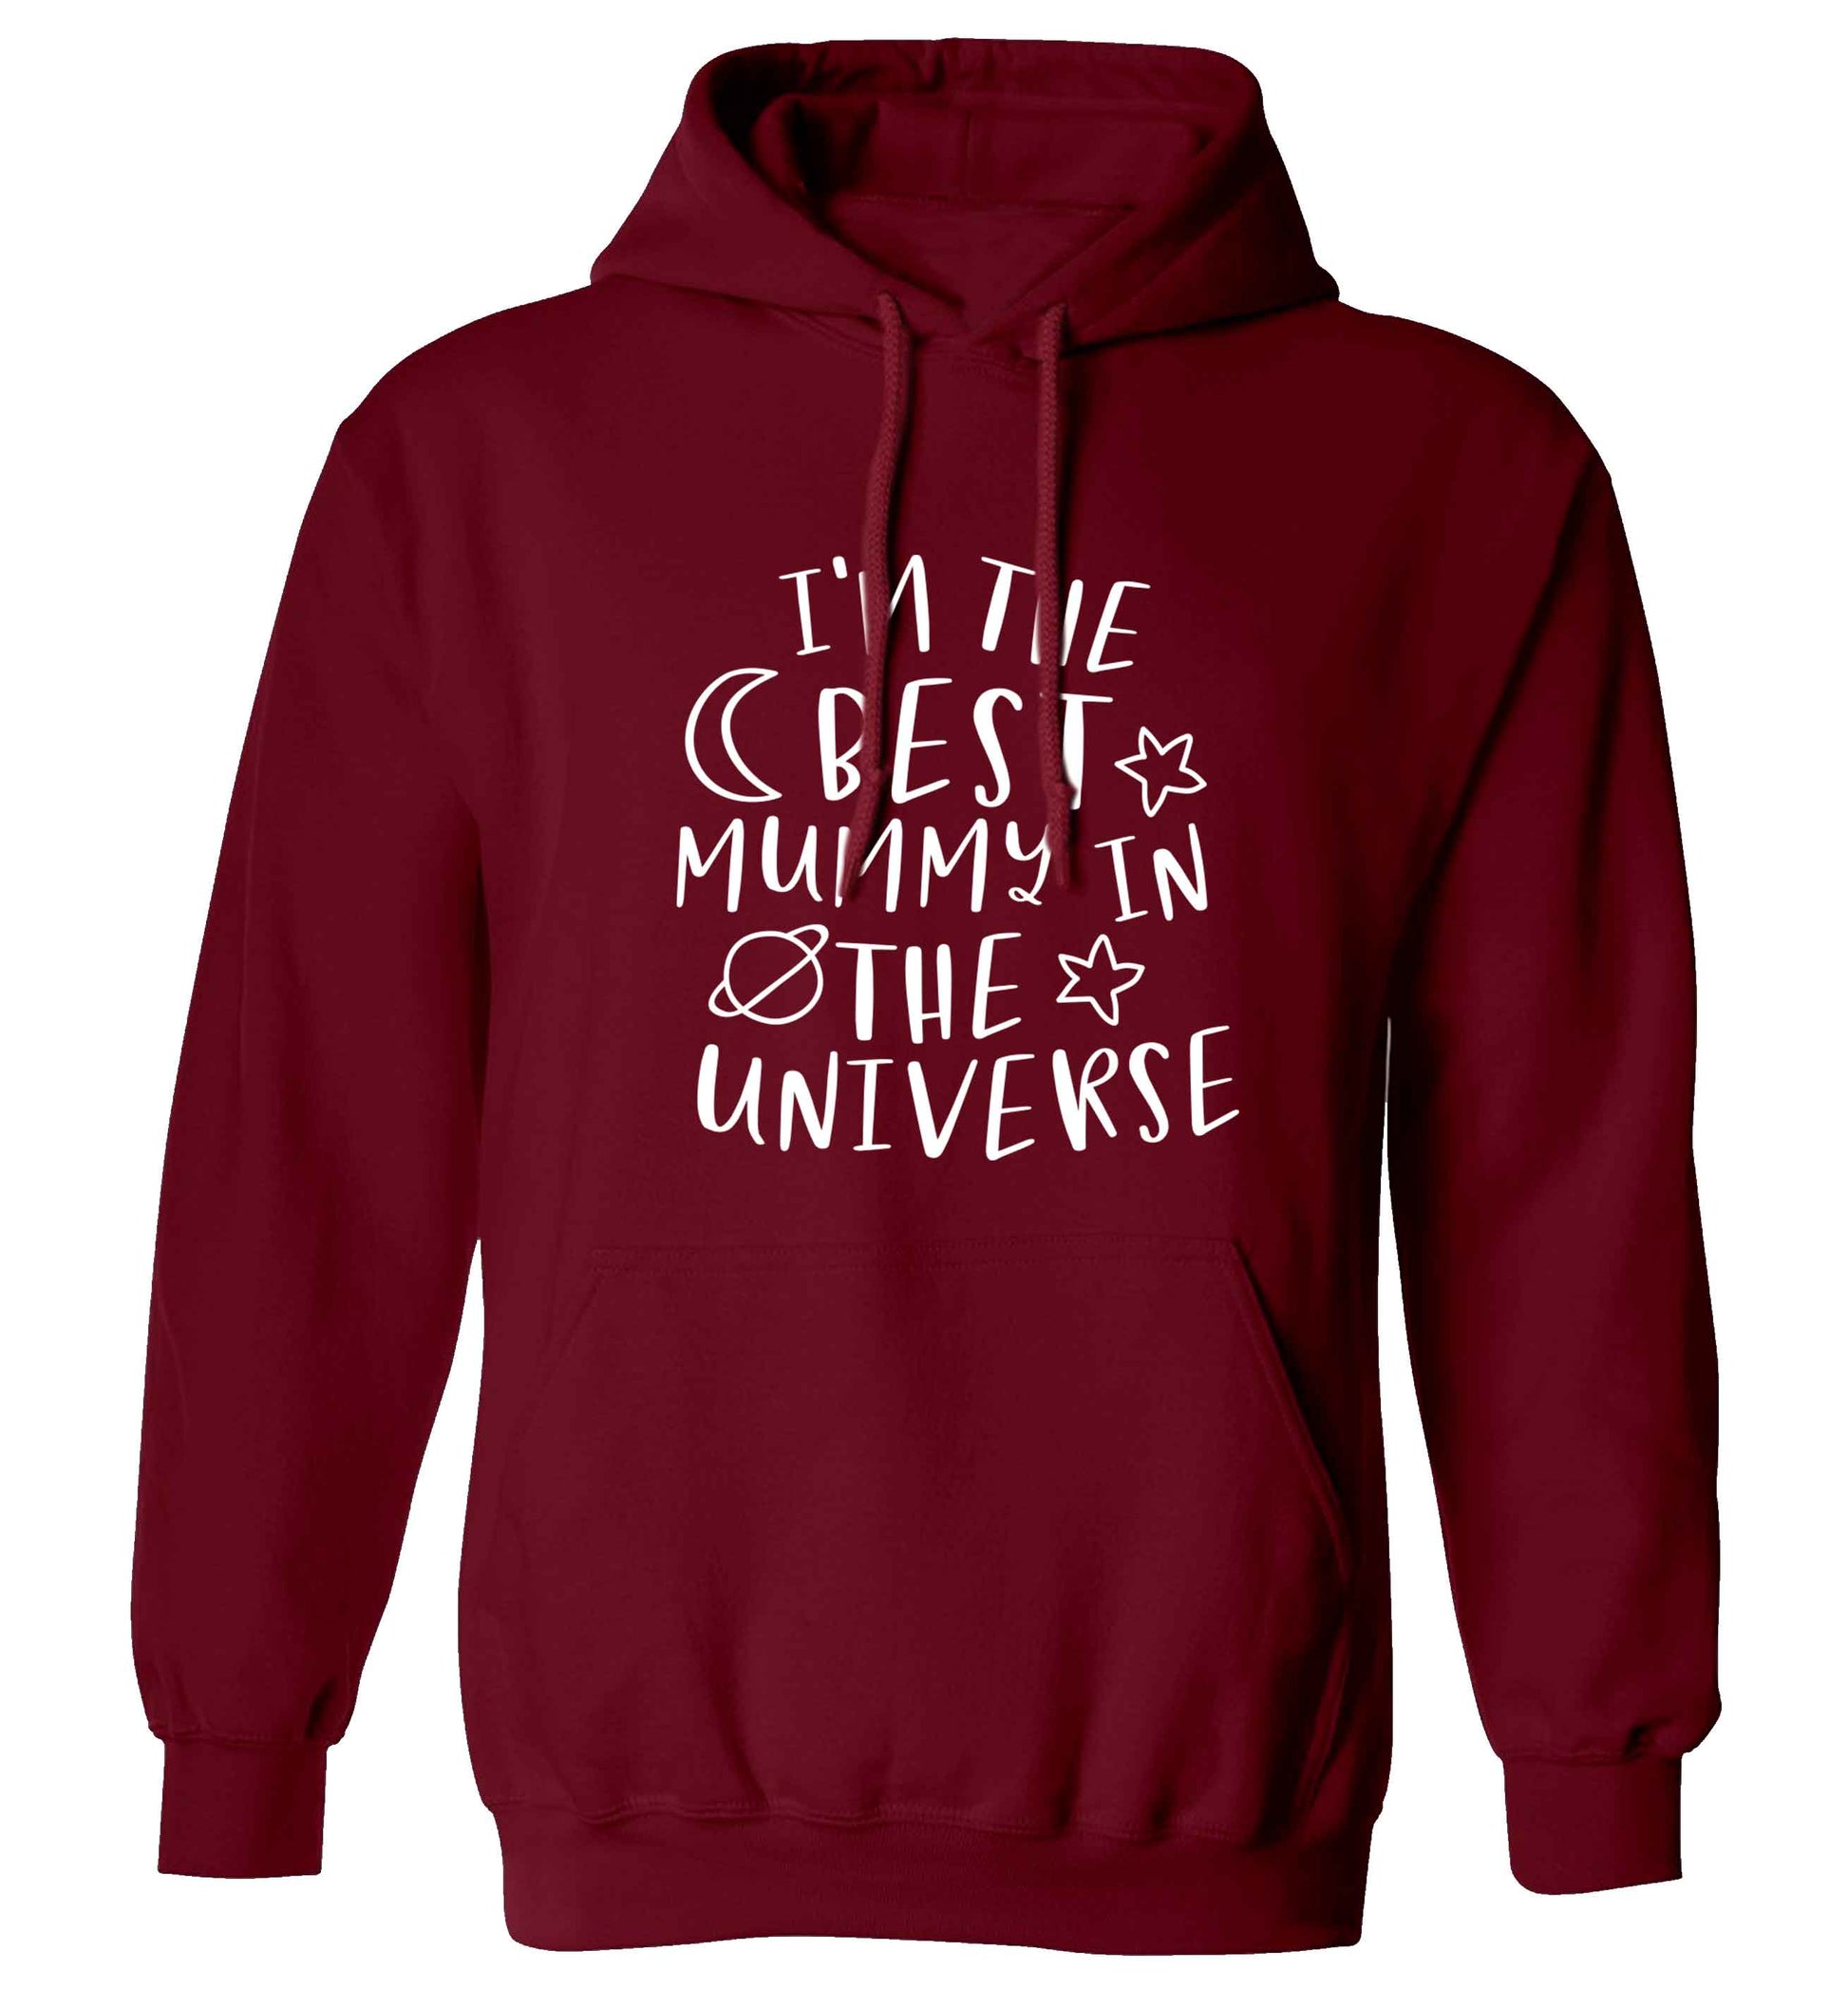 I'm the best mummy in the universe adults unisex maroon hoodie 2XL